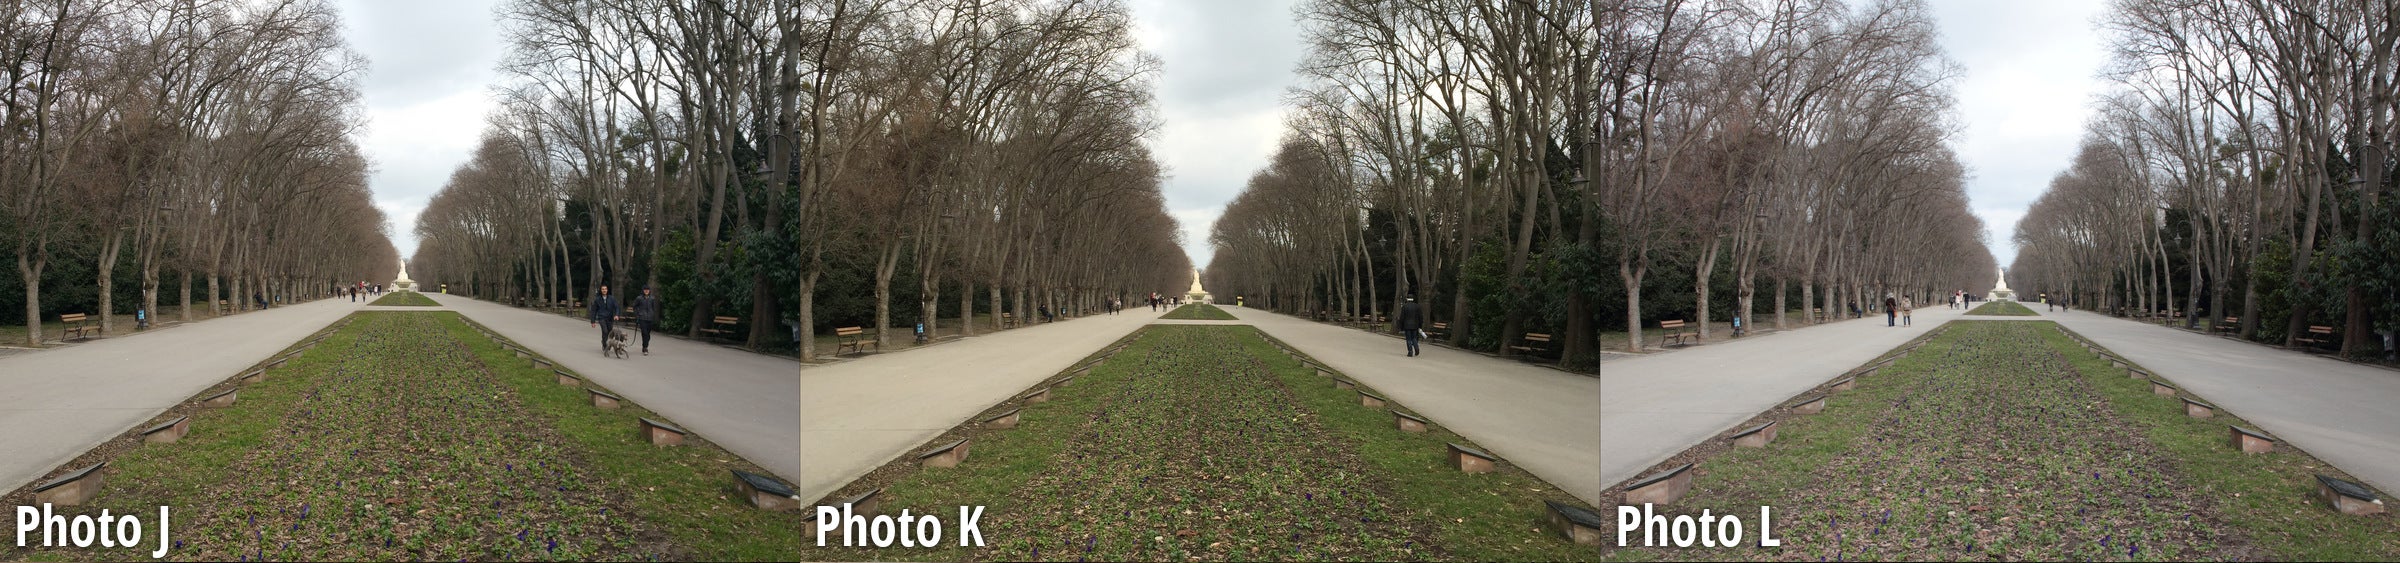 Side-by-side preview - iPhone 6 Plus vs Samsung Galaxy Note 4 vs DSLR blind camera comparison: you choose the best camera